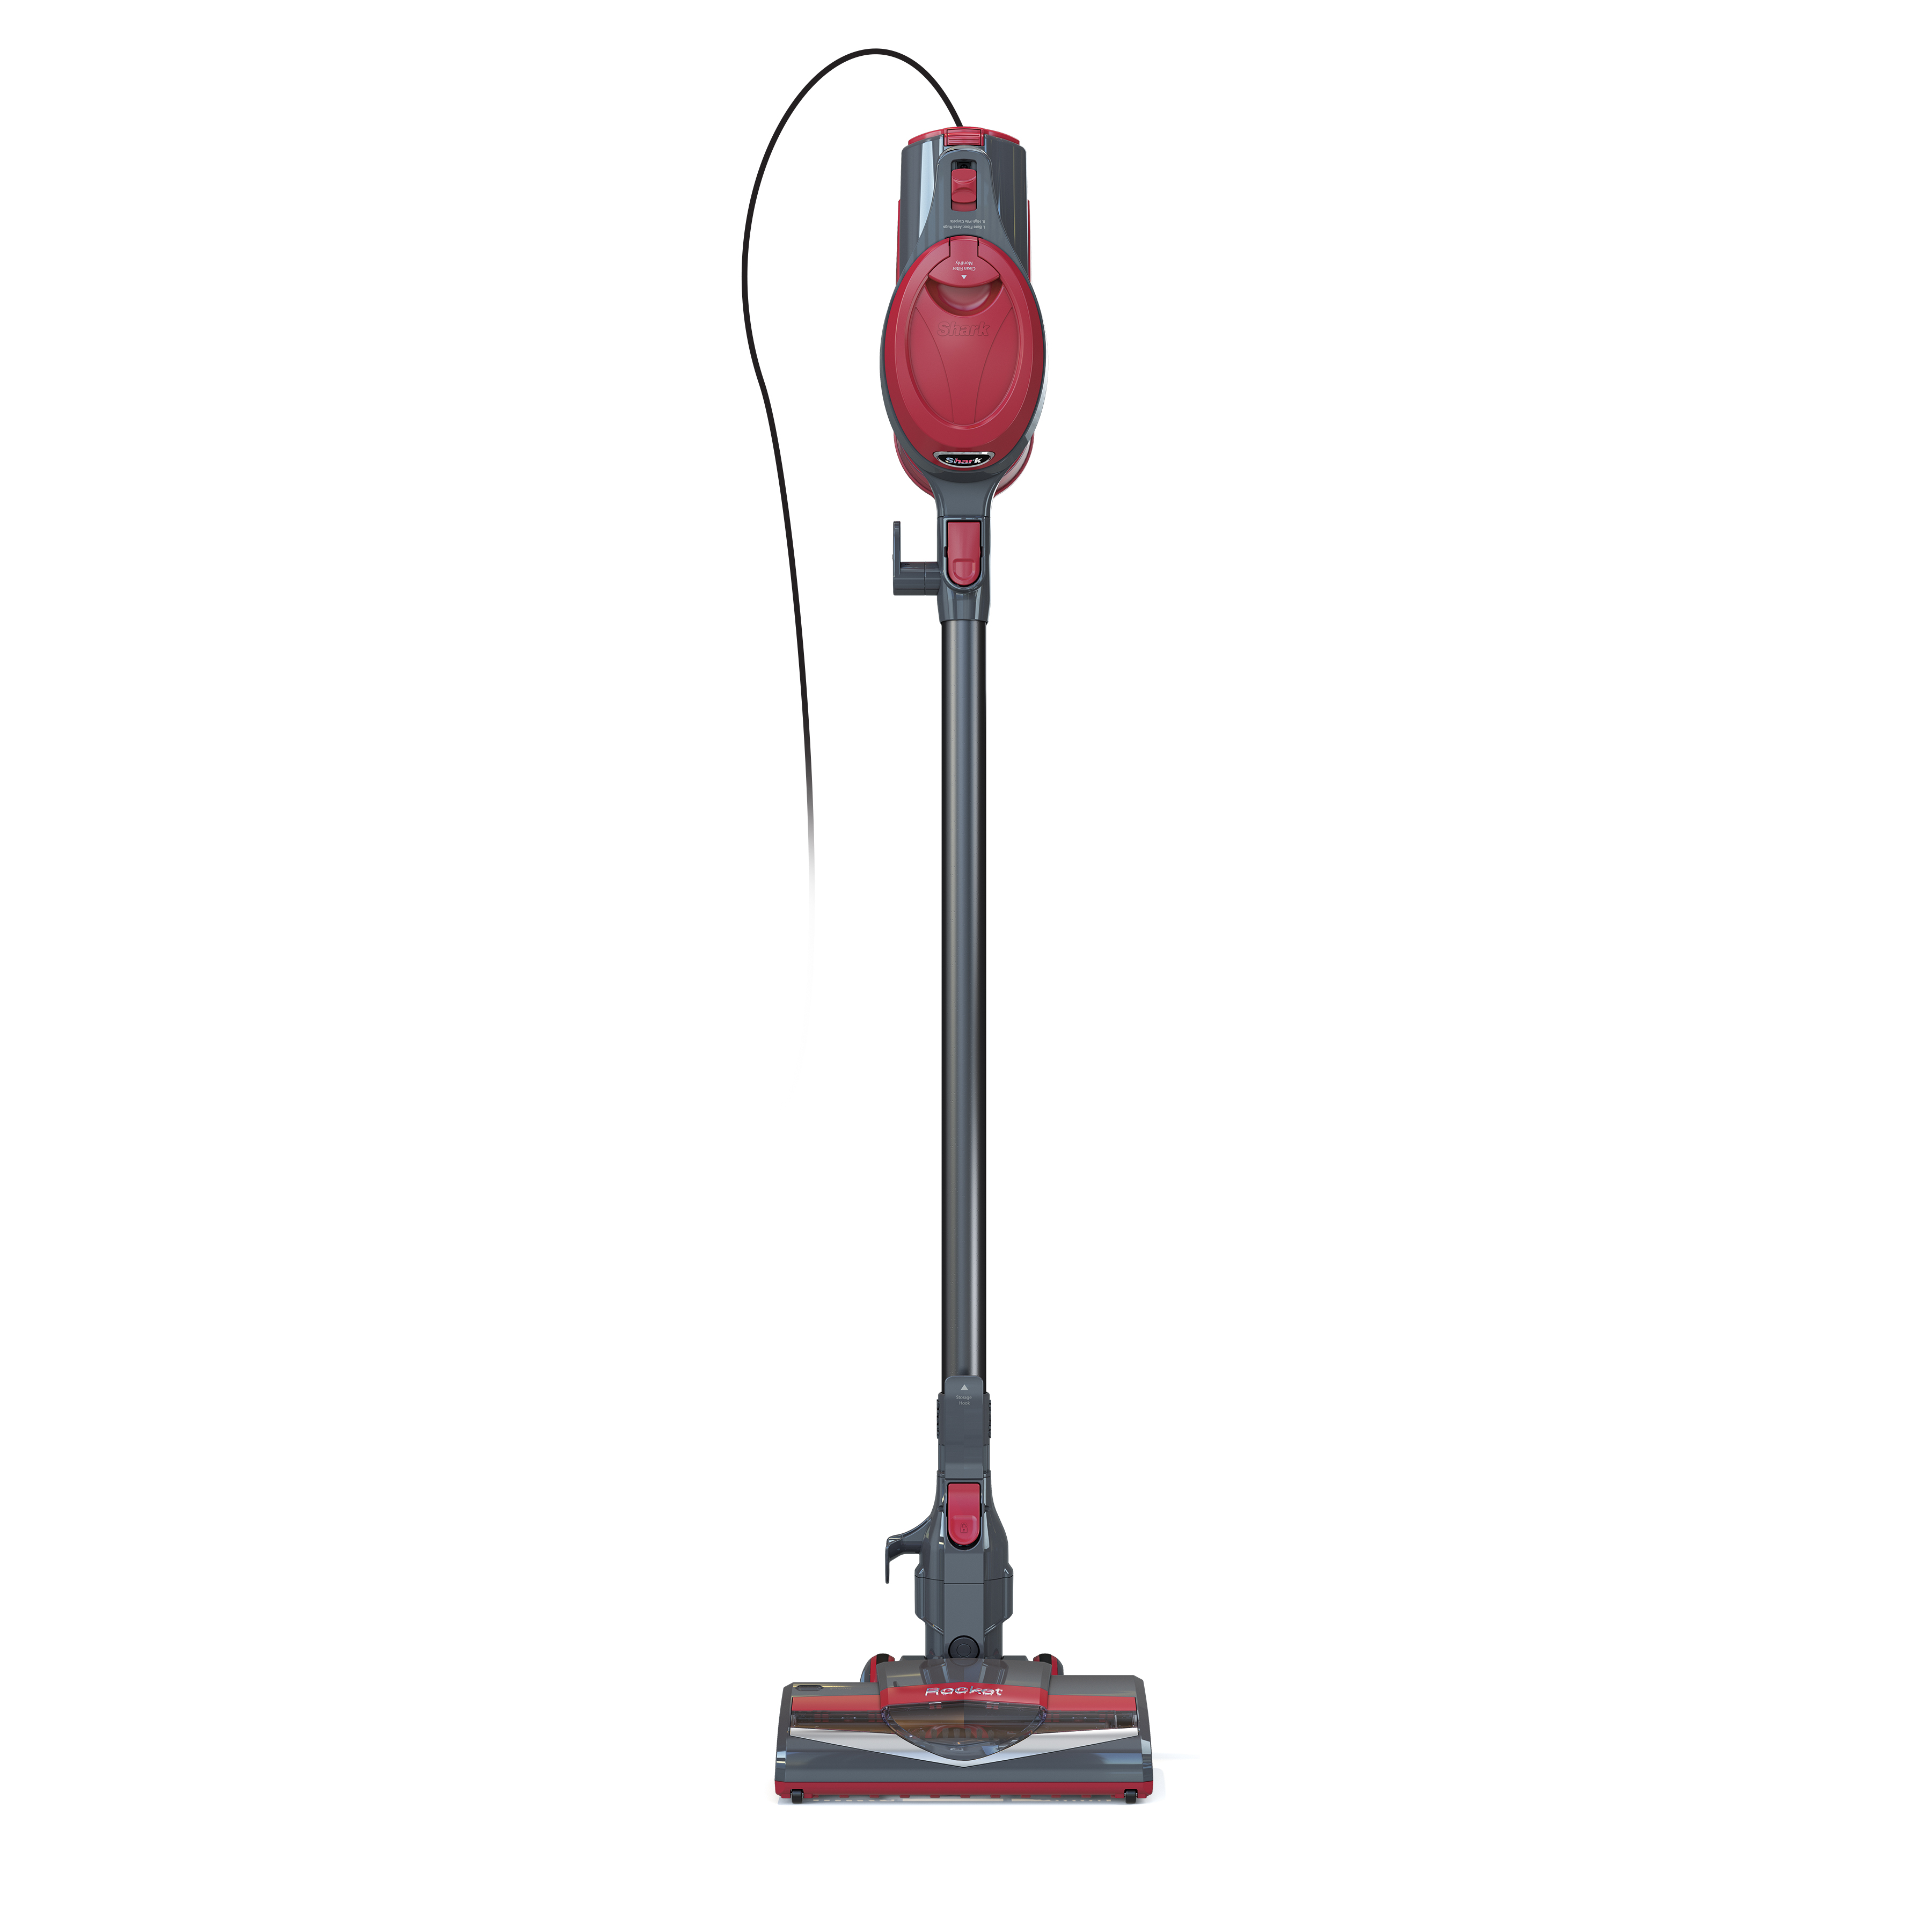 Shark Corded Stick Vacuum, Red - image 1 of 6